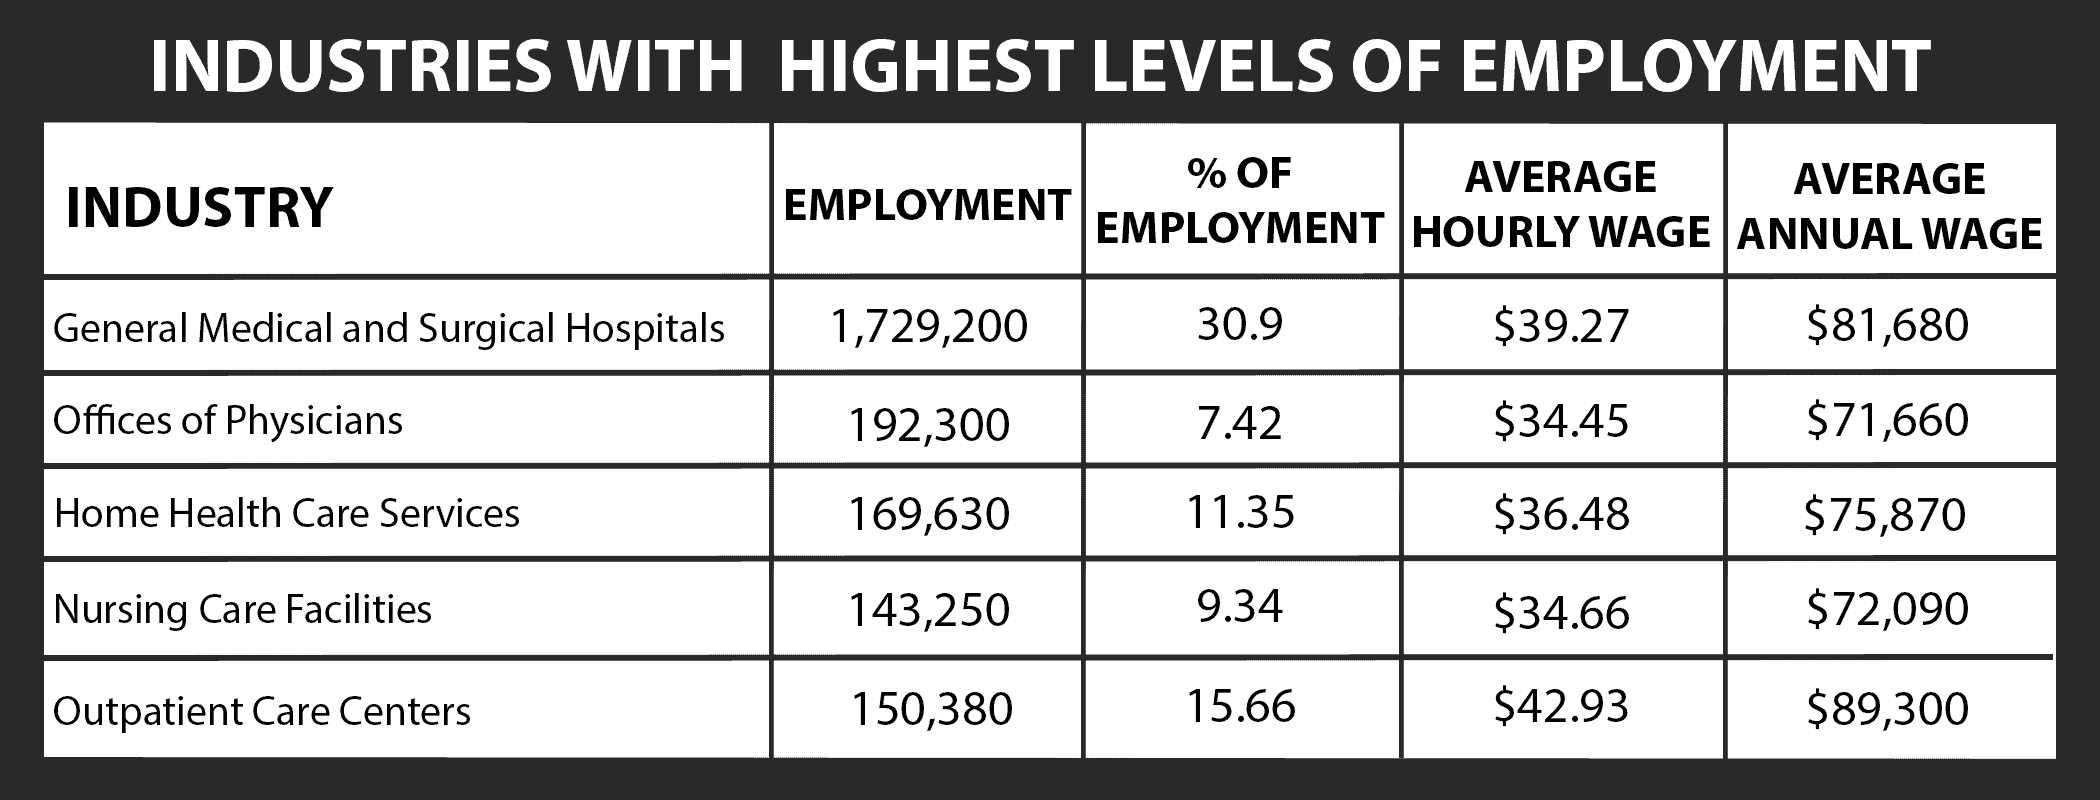 Nurse Industries With Highest Level of Employment